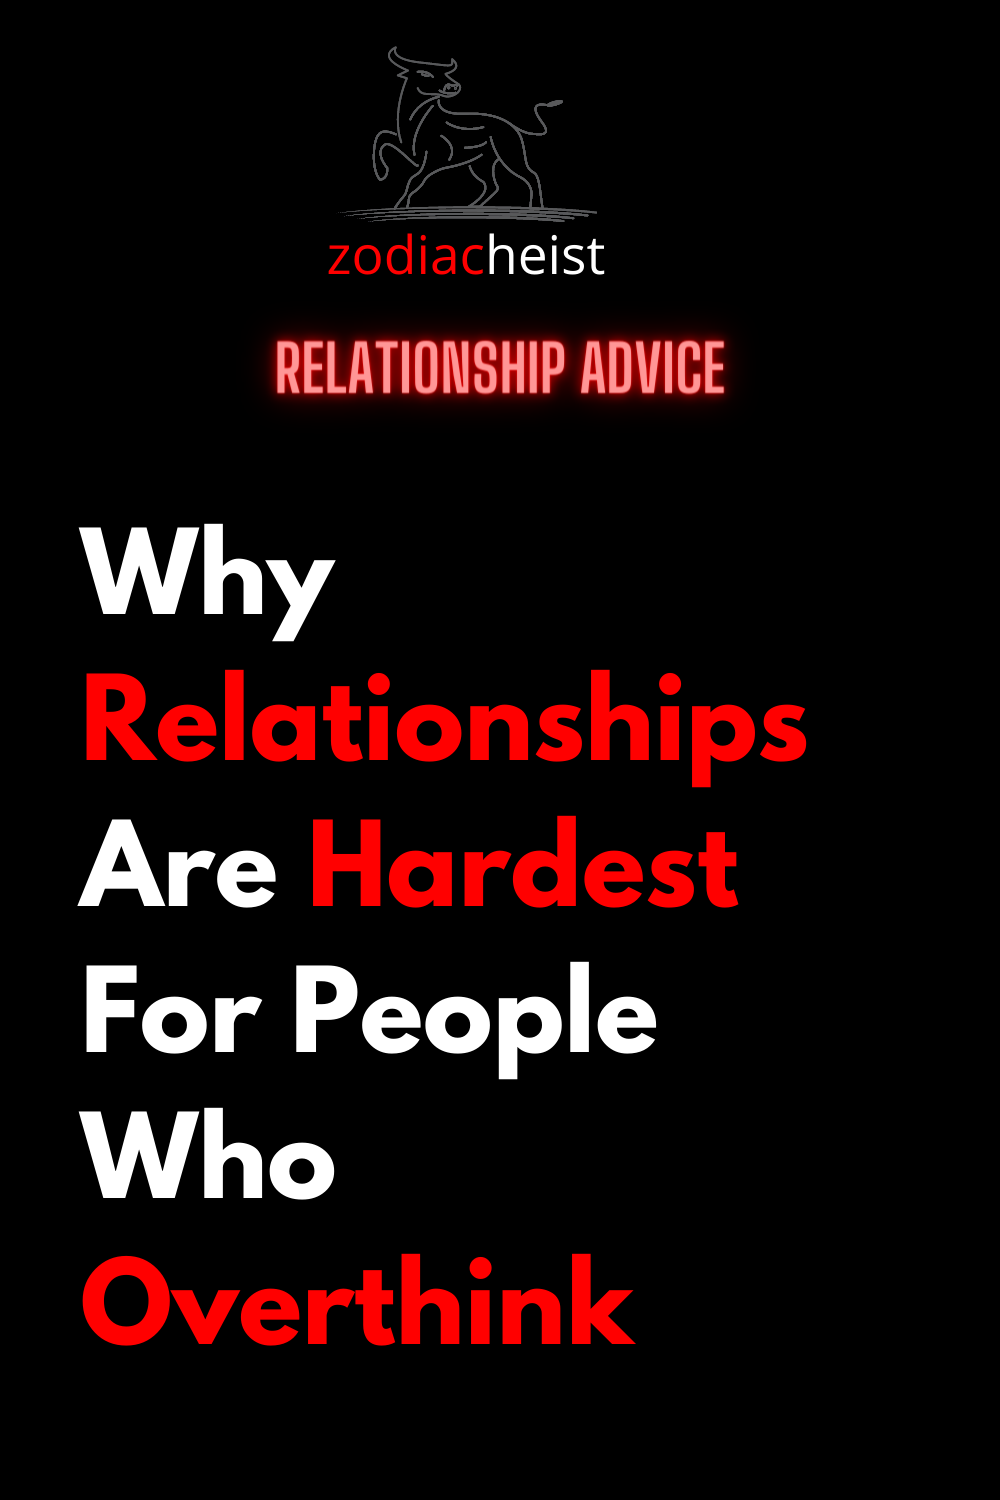 Why Relationships Are Hardest For People Who Overthink